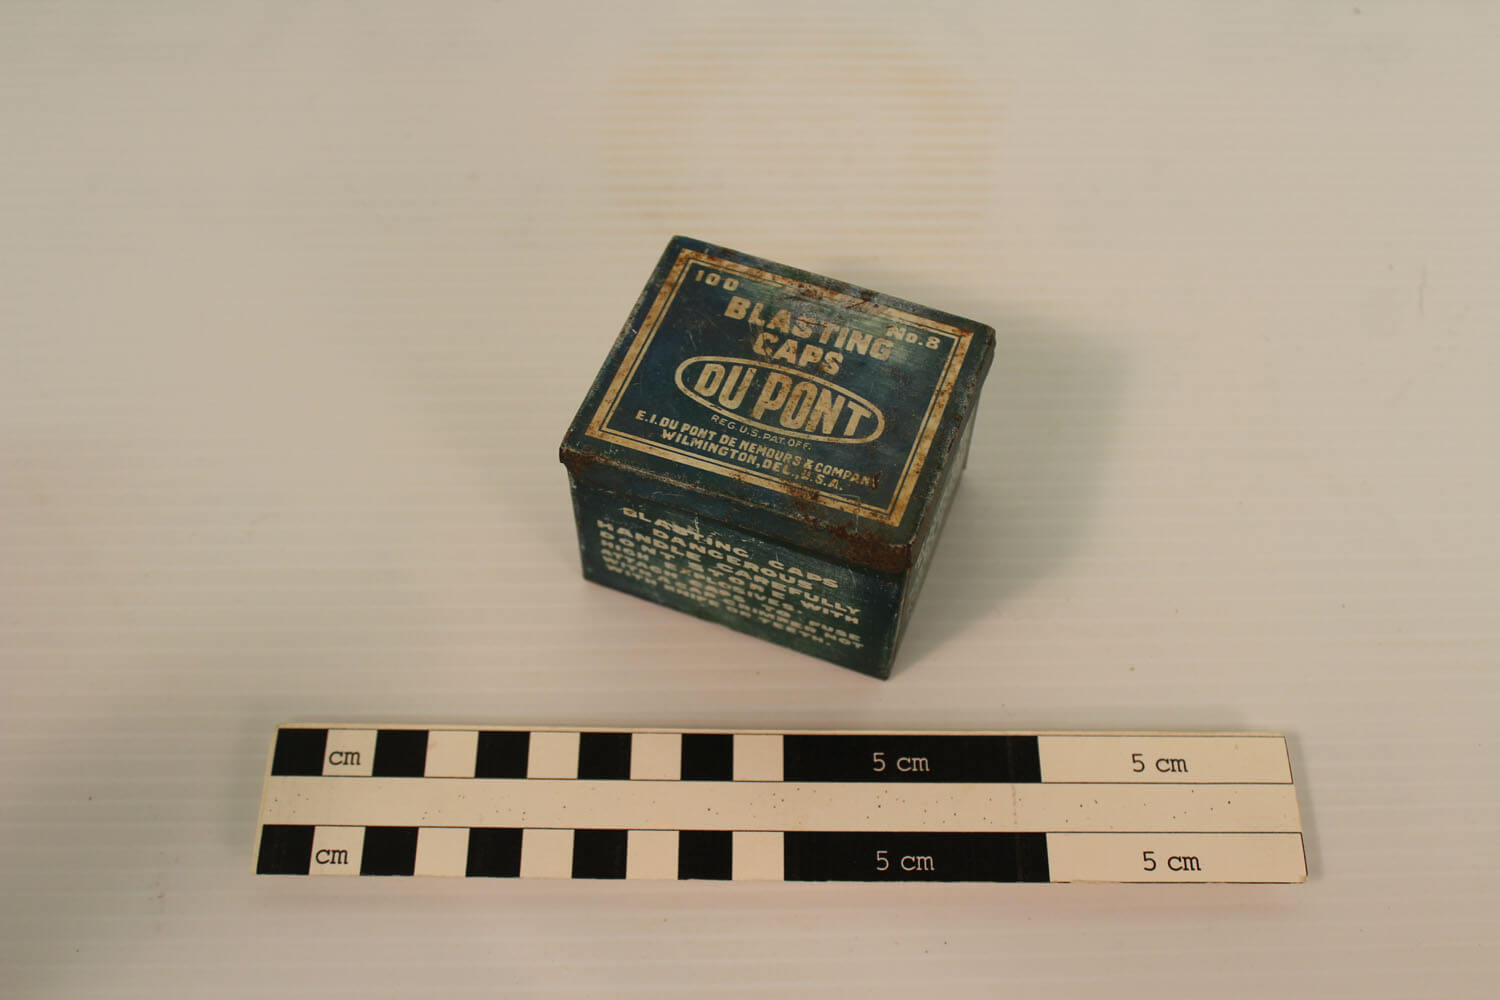 A Blasting Cap box from the BLM Collection.